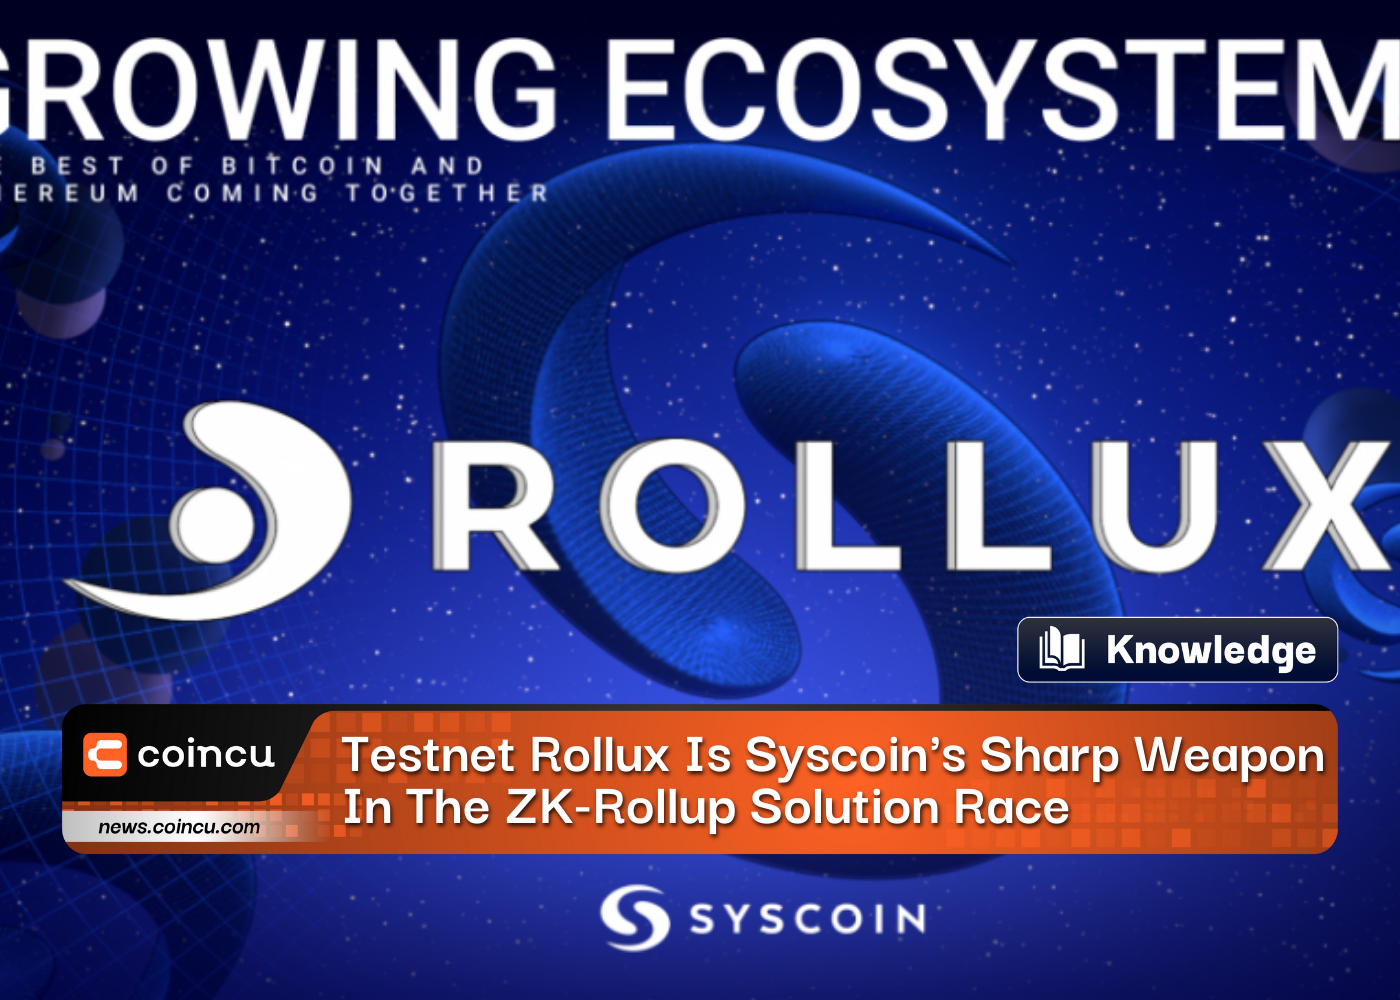 Testnet Rollux Is Syscoin's Sharp Weapon In The ZK-Rollup Solution Race